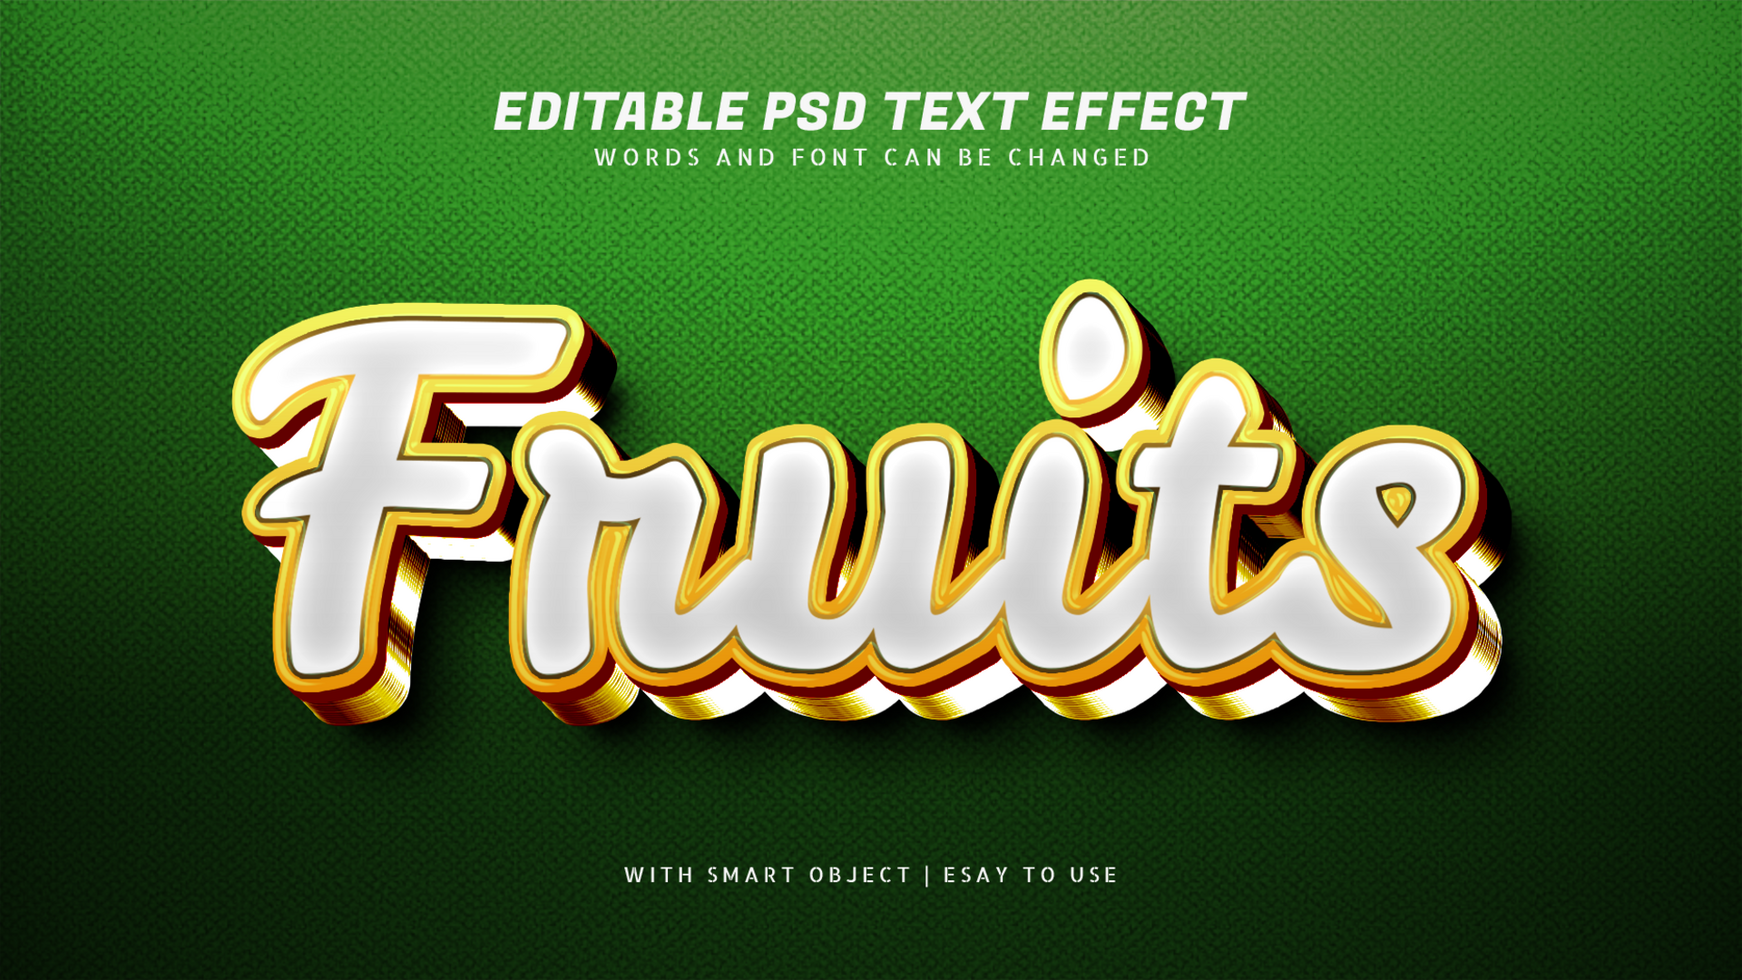 Fruits text effect with yellow 3d style psd